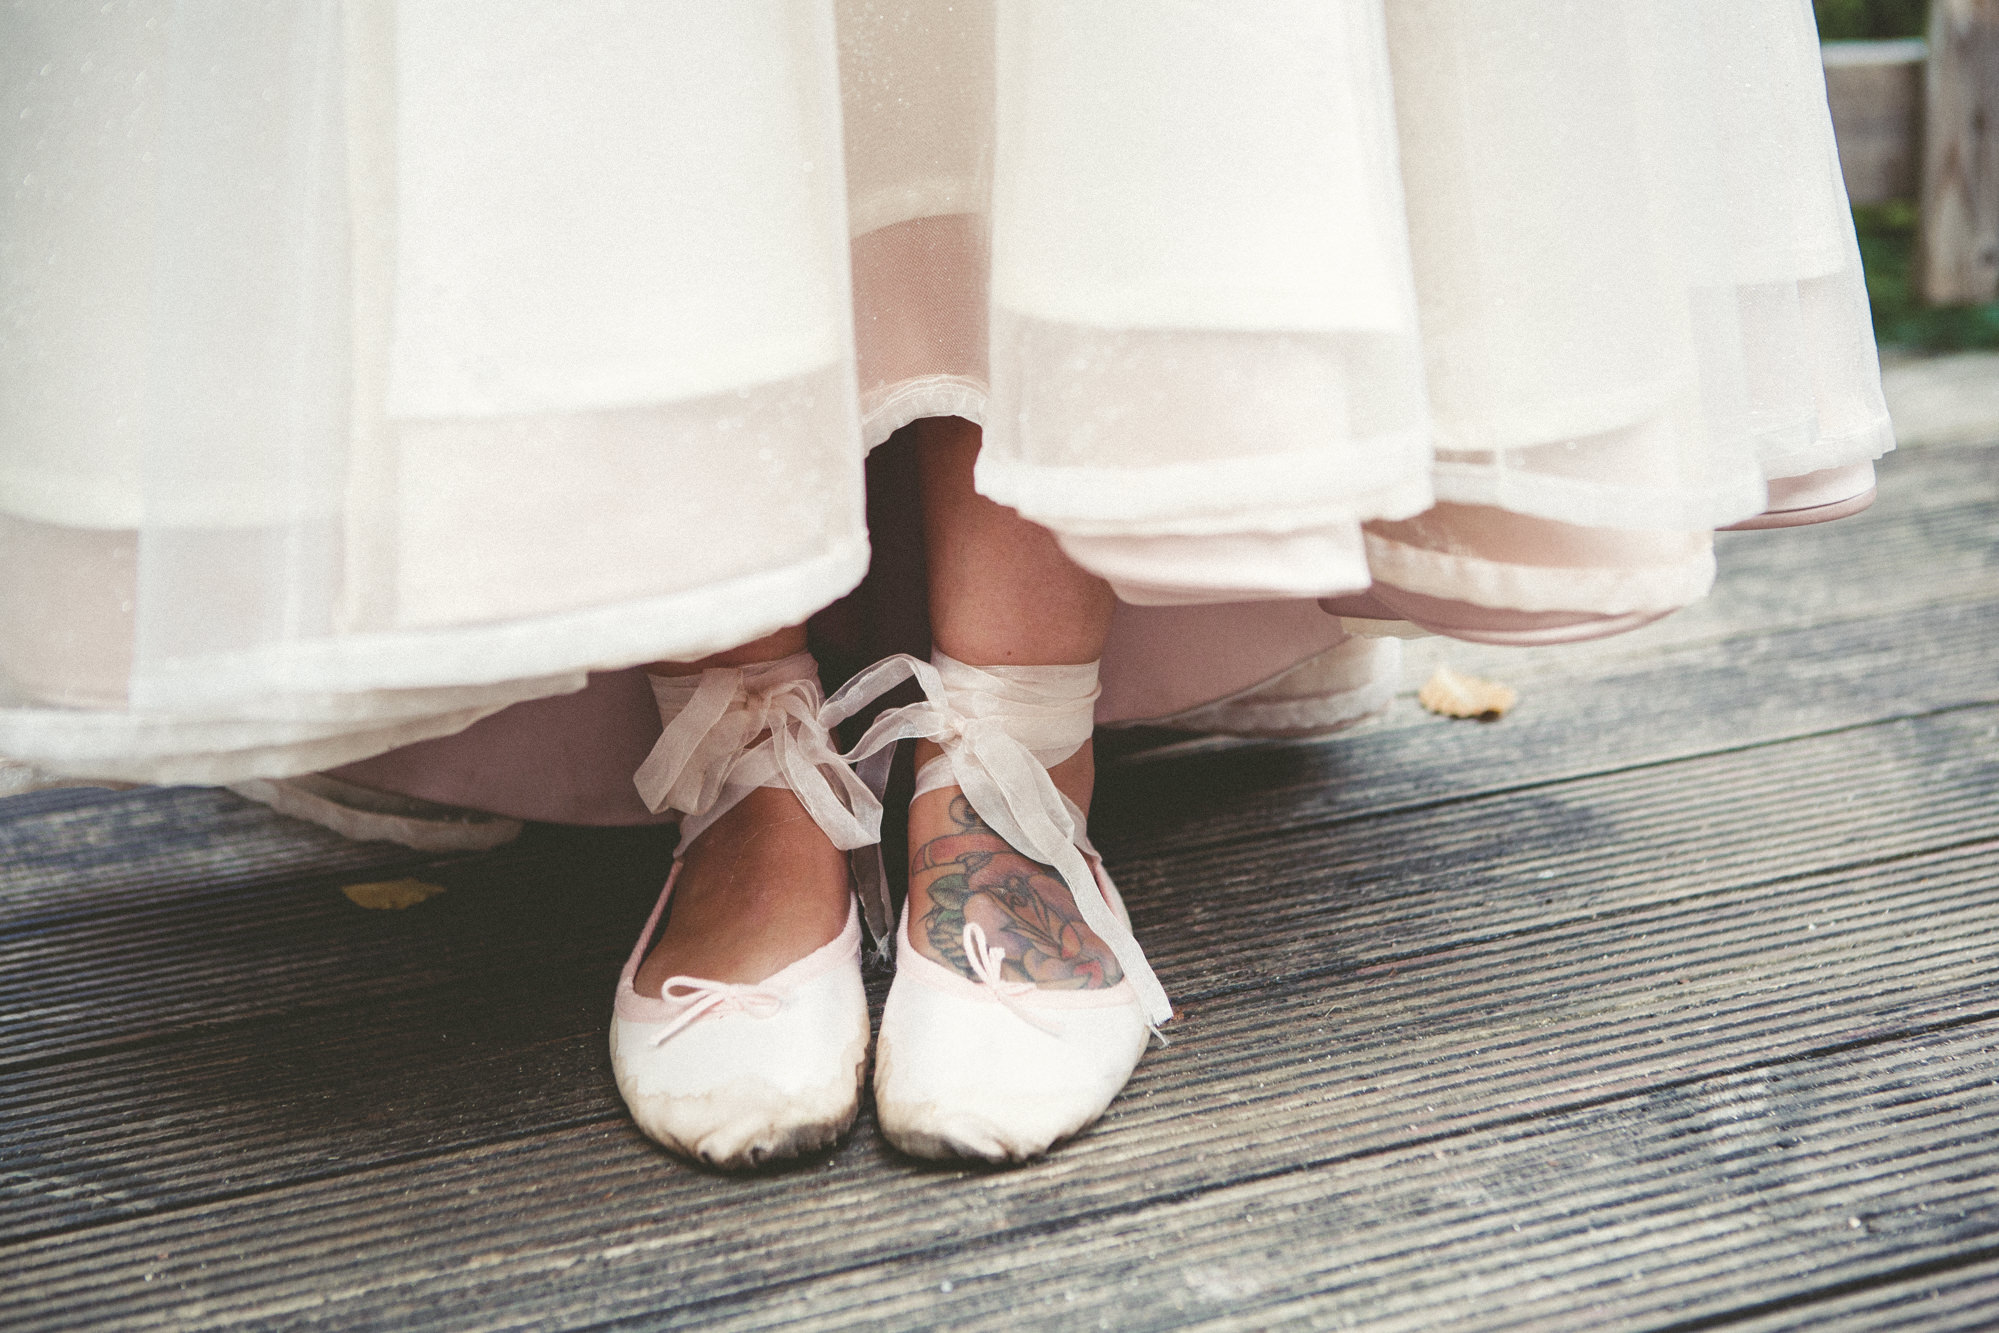 14 Beautiful Ballerina Shoes For Weddings  hitchedcouk